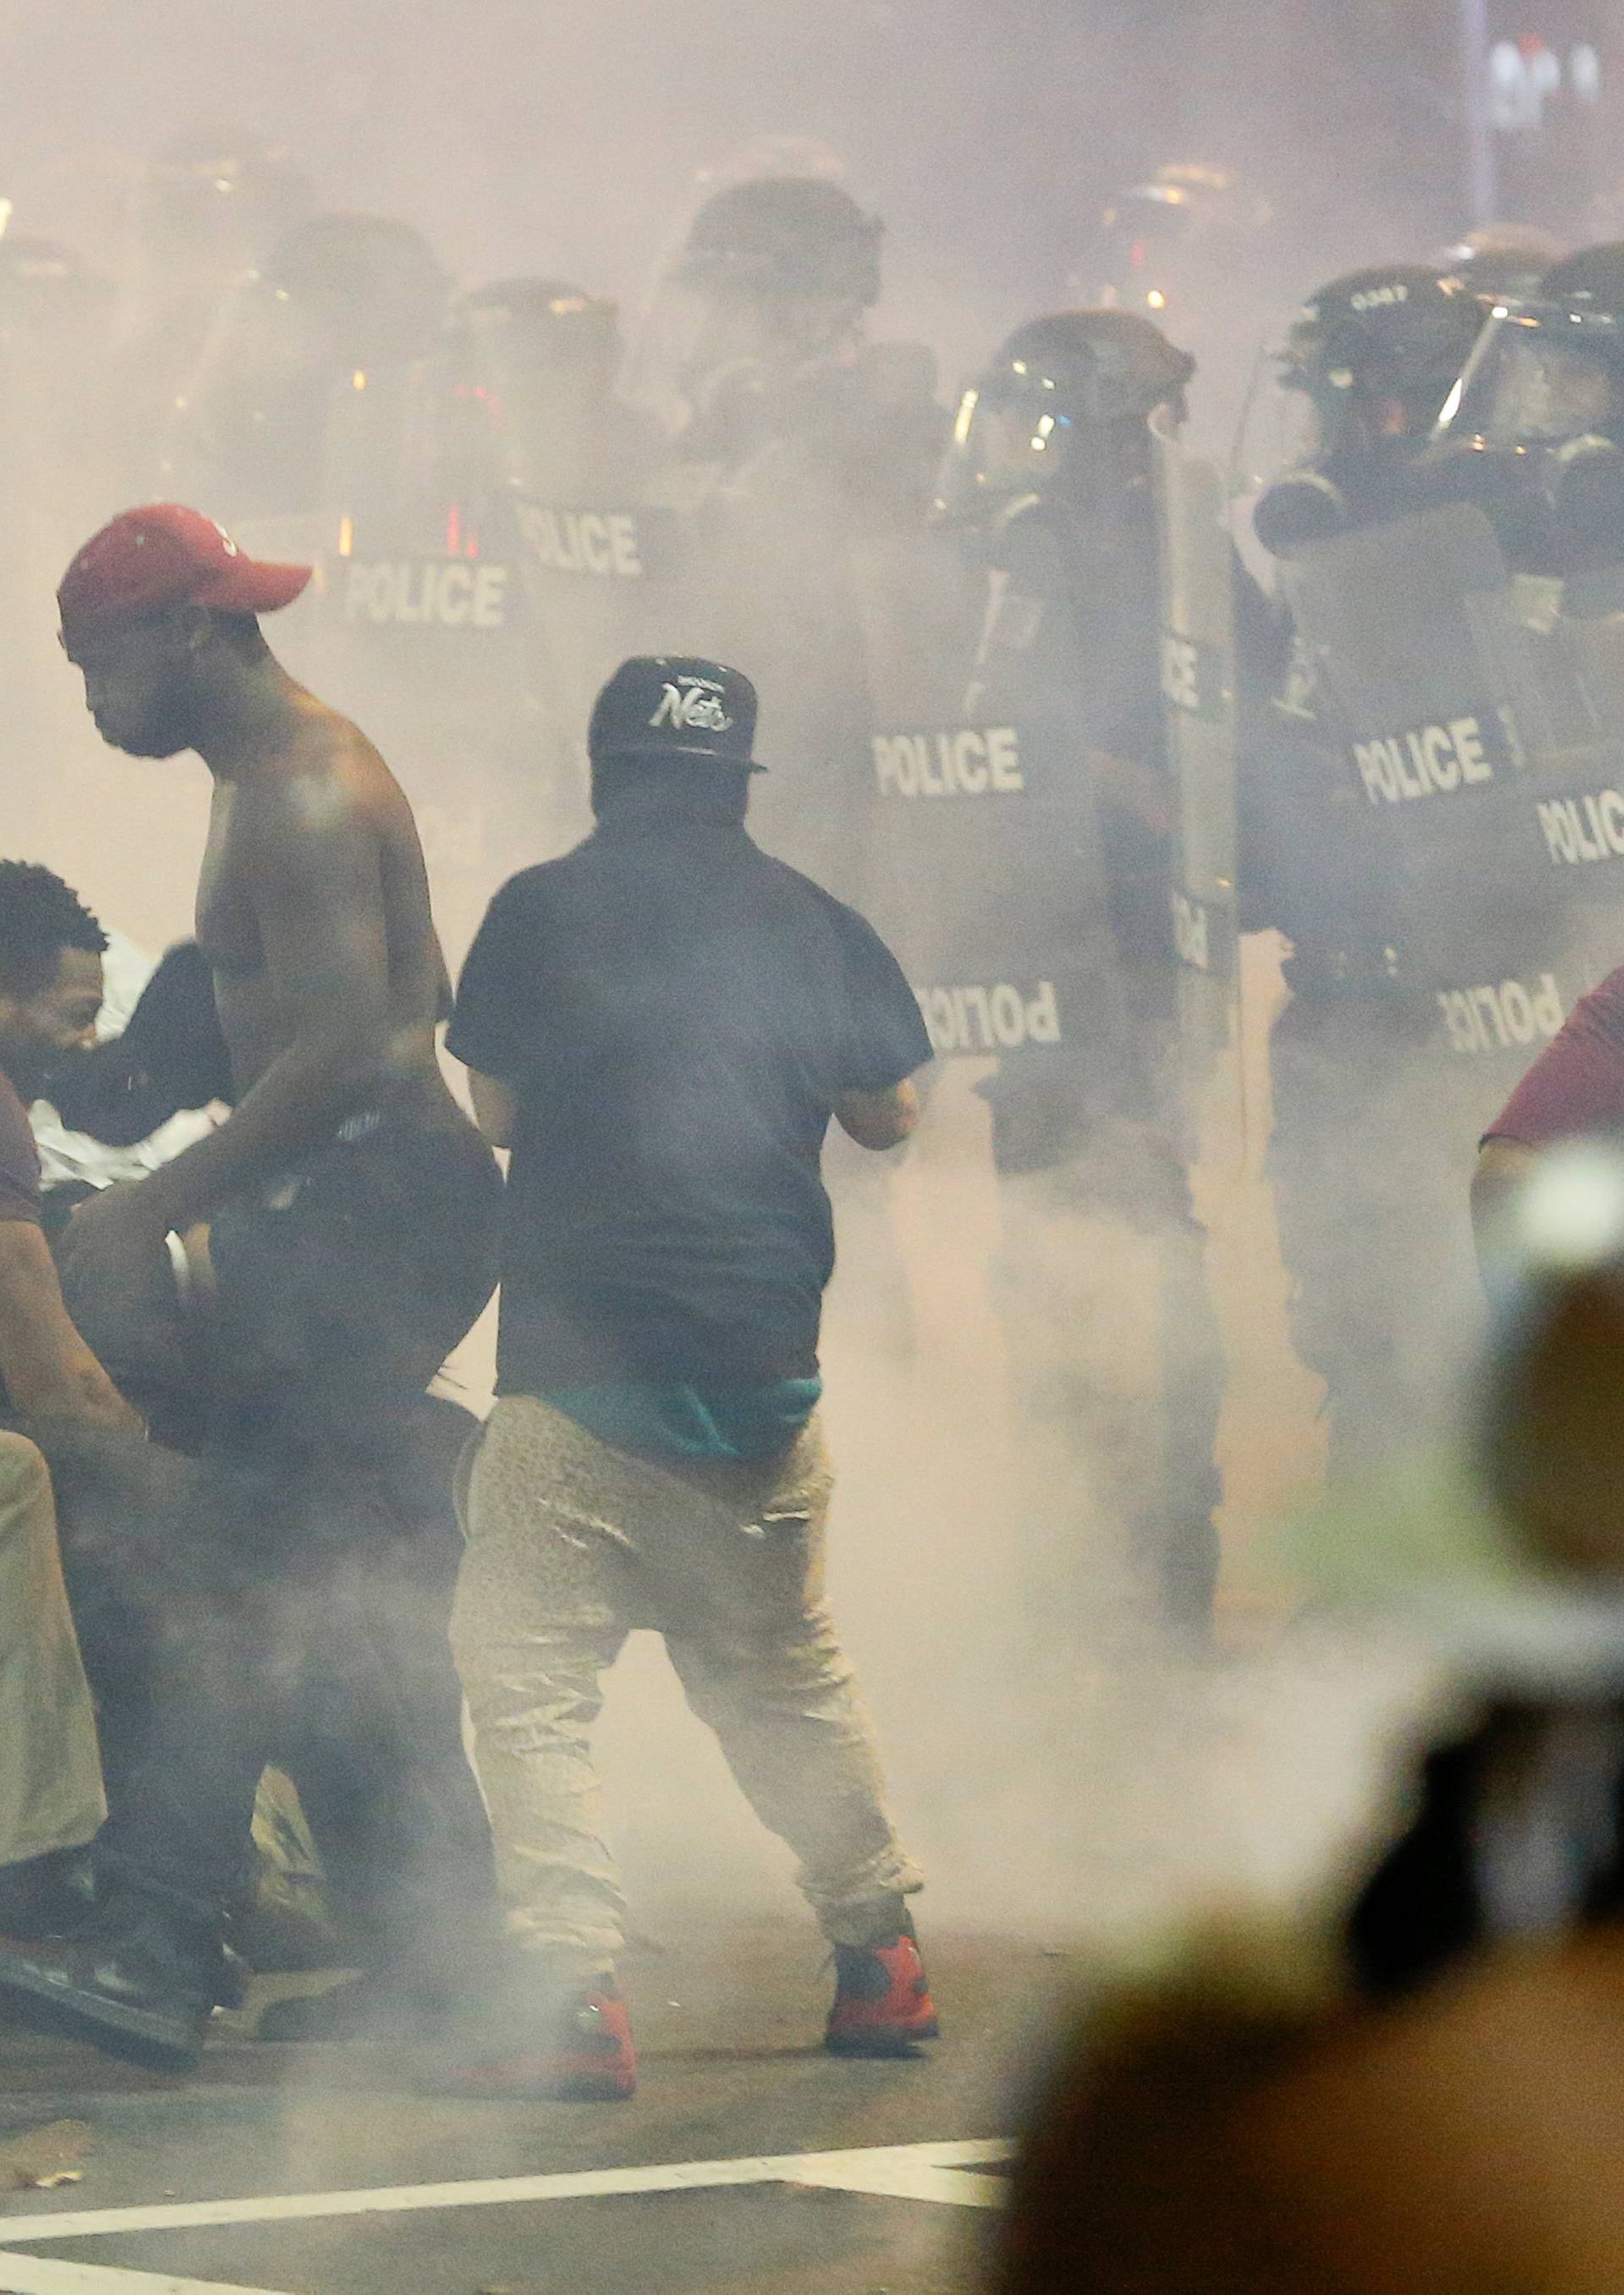 People maneuver amongst tear gas in uptown Charlotte, NC during a protest of the police shooting of Keith Scott, in Charlotte